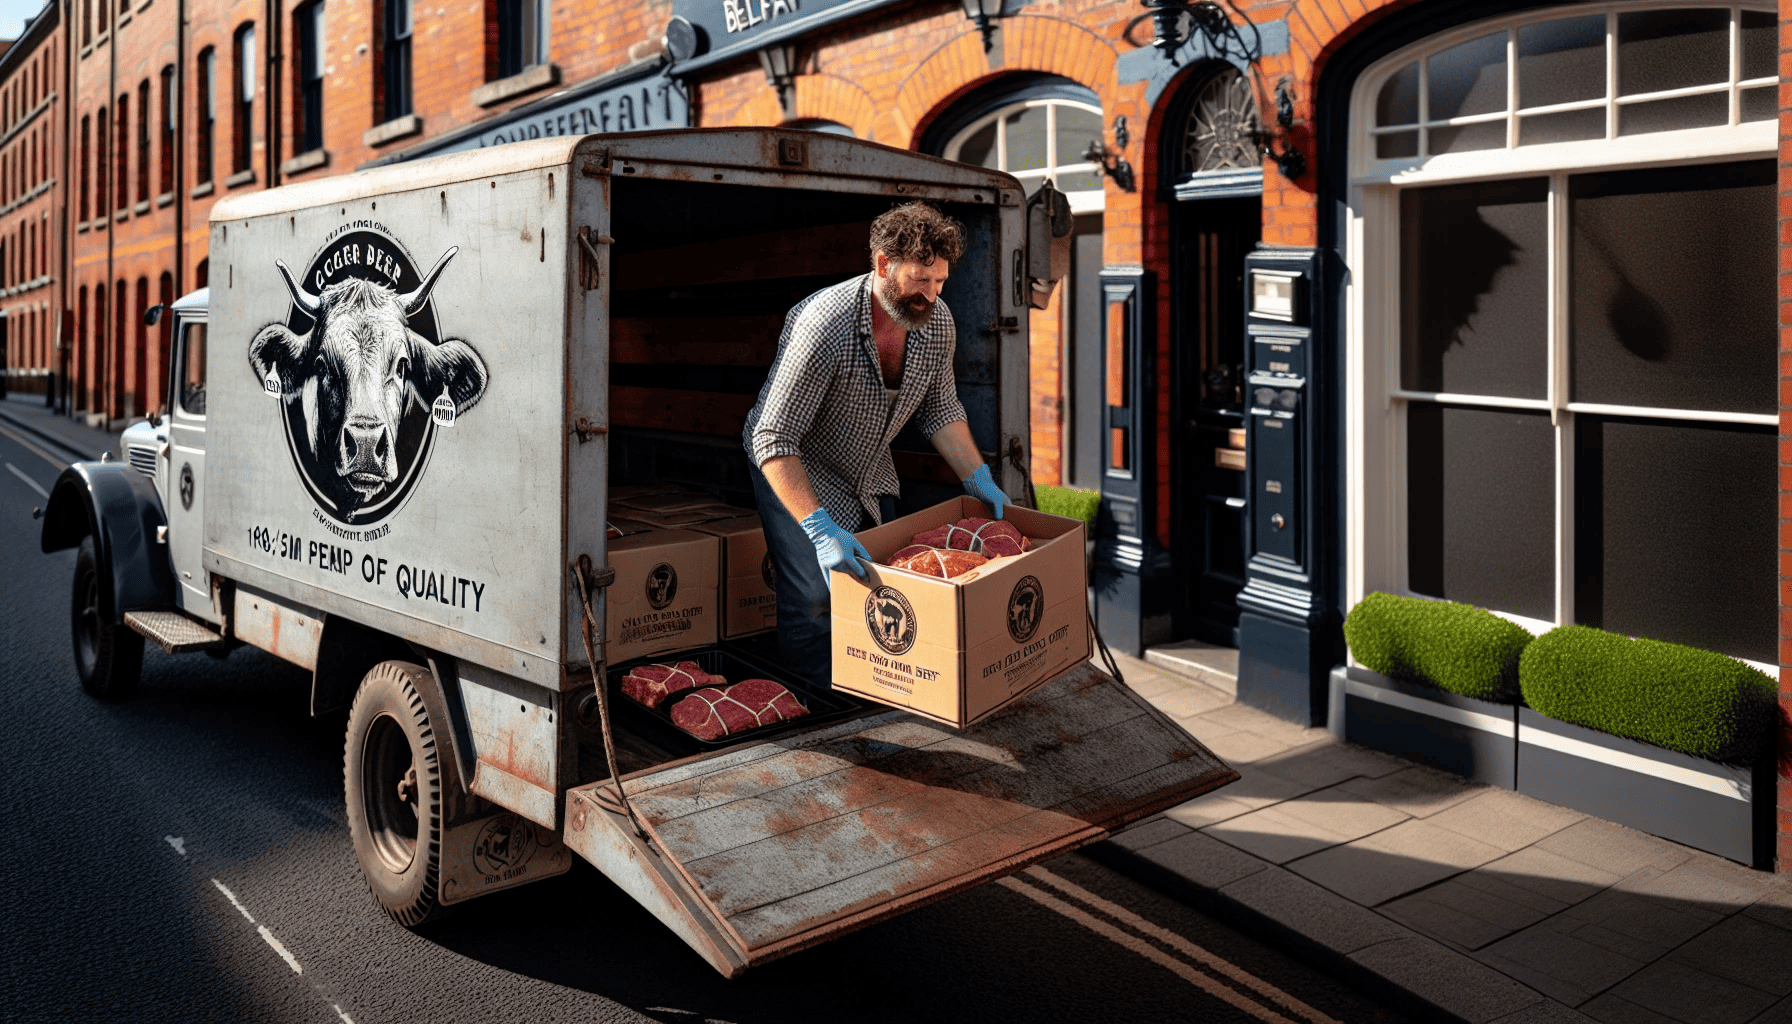 Local beef suppliers delivering premium cuts of steak to a restaurant in Belfast